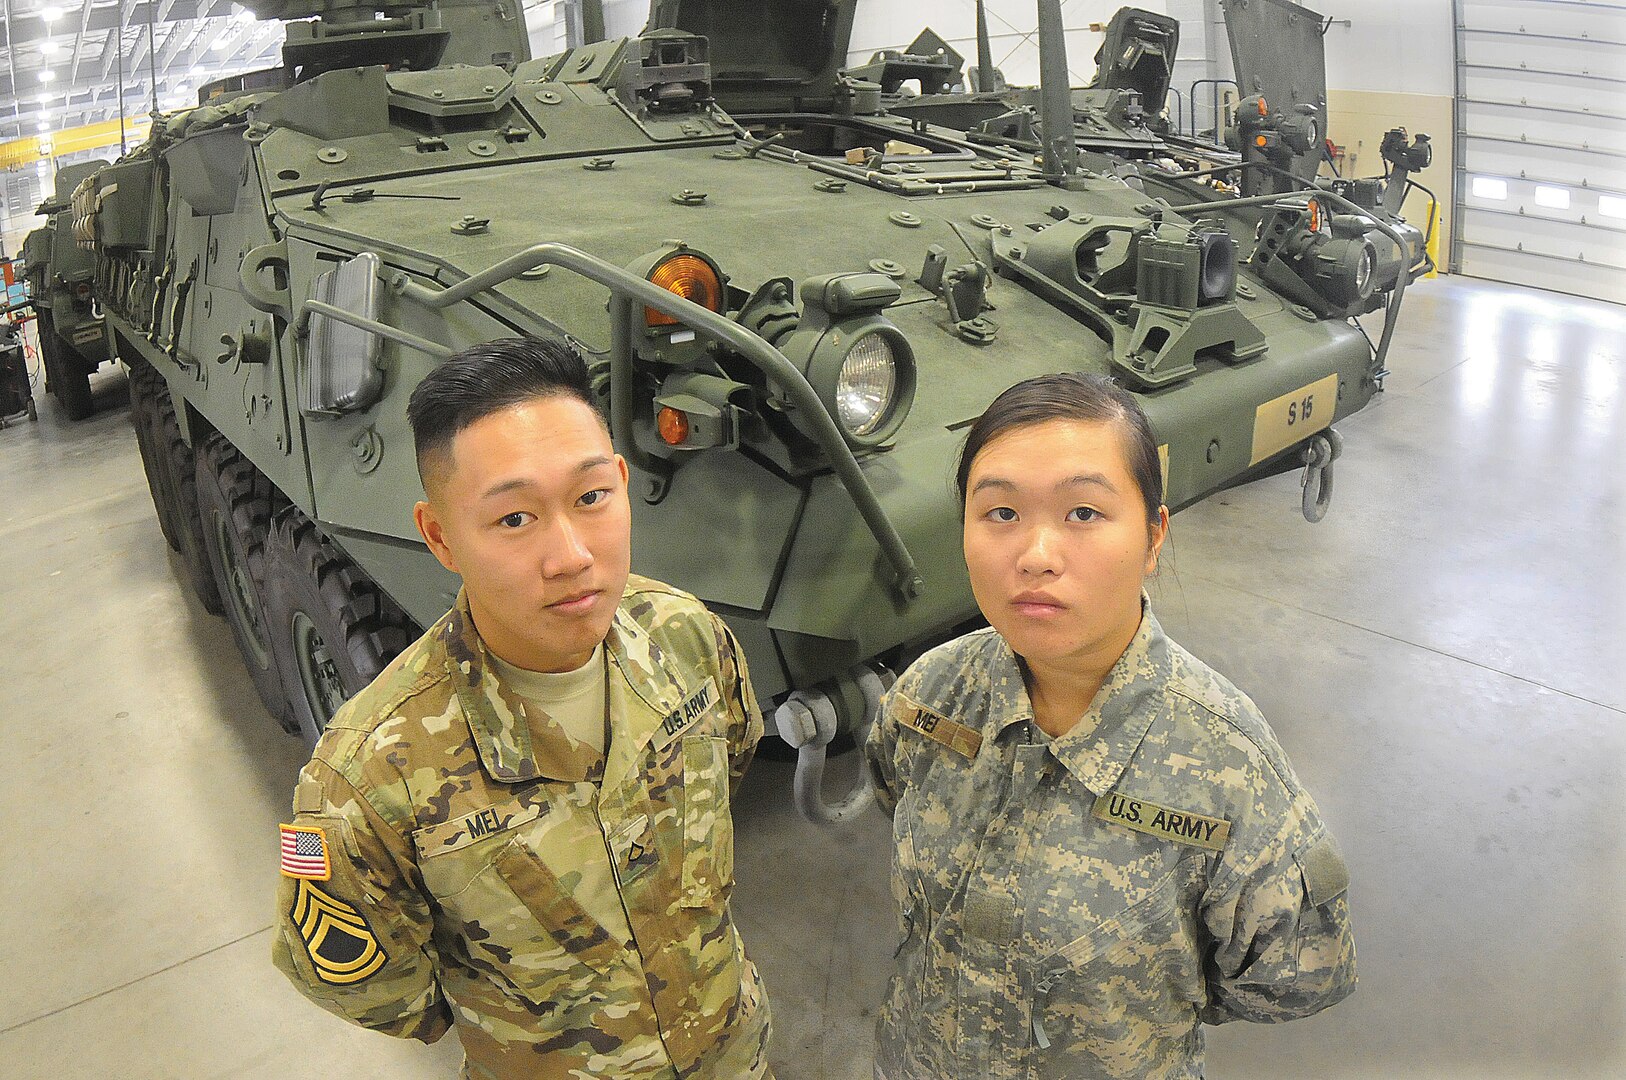 Pfc. Sam and Pvt. Jennifer Mei, both Pennsylvannia National Guard members, pose in front of a Stryker armored fighting vehicle at the Ordnance School Nov. 17, 2016. Sam graduated from the17-week  course Nov. 22.  Jennifer is scheduled to complete the course in March.  Another sibling, Milton, 19, is also undergoing training at Fort Lee. 